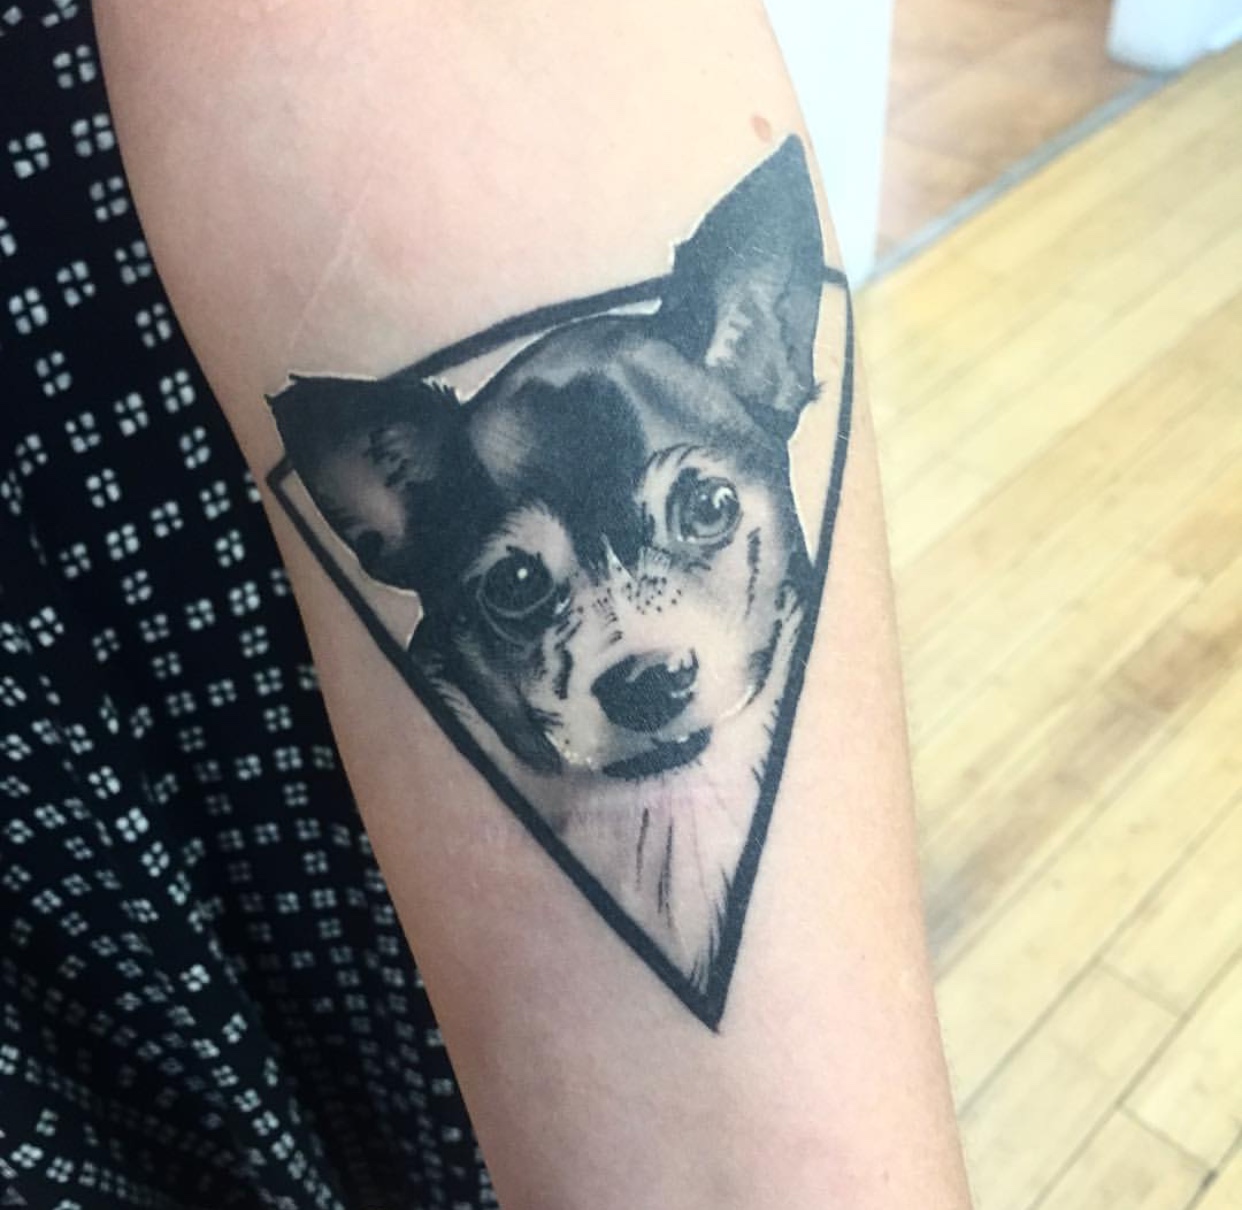 Chihuahua face in upside down triangle tattoo on the forearm